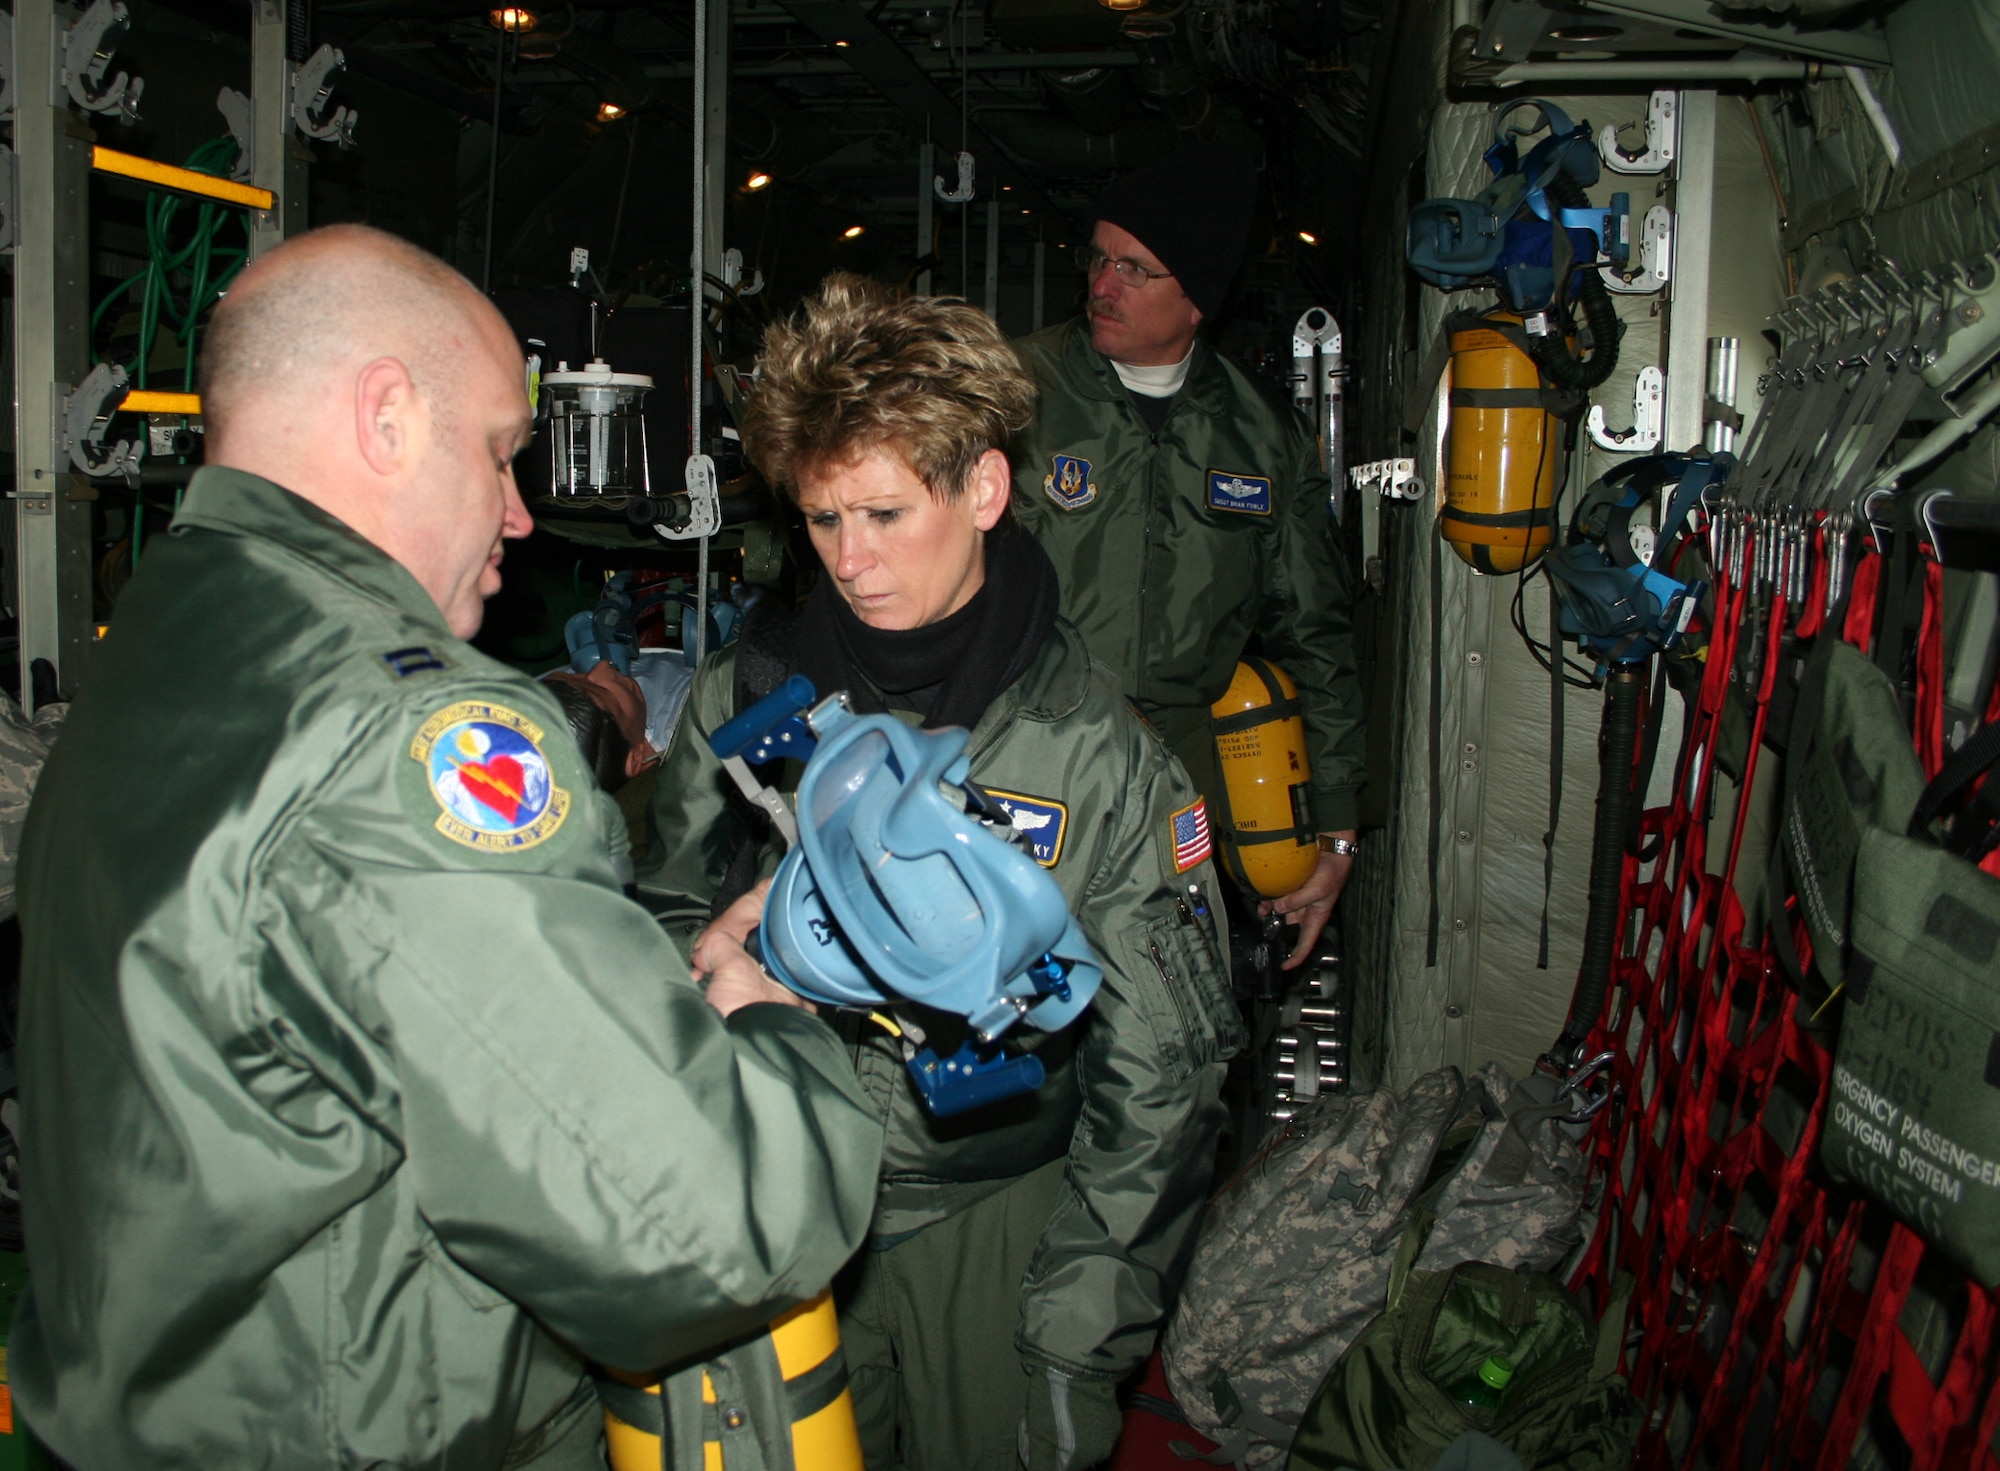 WRIGHT-PATTERSON AIR FORCE BASE, Ohio - Maj. Kimberlee Sandusky and Capt. Christopher Blomberg, both from the 445th Aeromedical Evacuation Squadron, inspect flight gear for an AES training flight Dec. 16. Members of the 445th Aeromedical Evacuation Squadron are ready to fill the need when events like natural disasters, war or routine medical transportation by air is required. (U.S. Air Force photo/Senior Airman Matthew Cook)